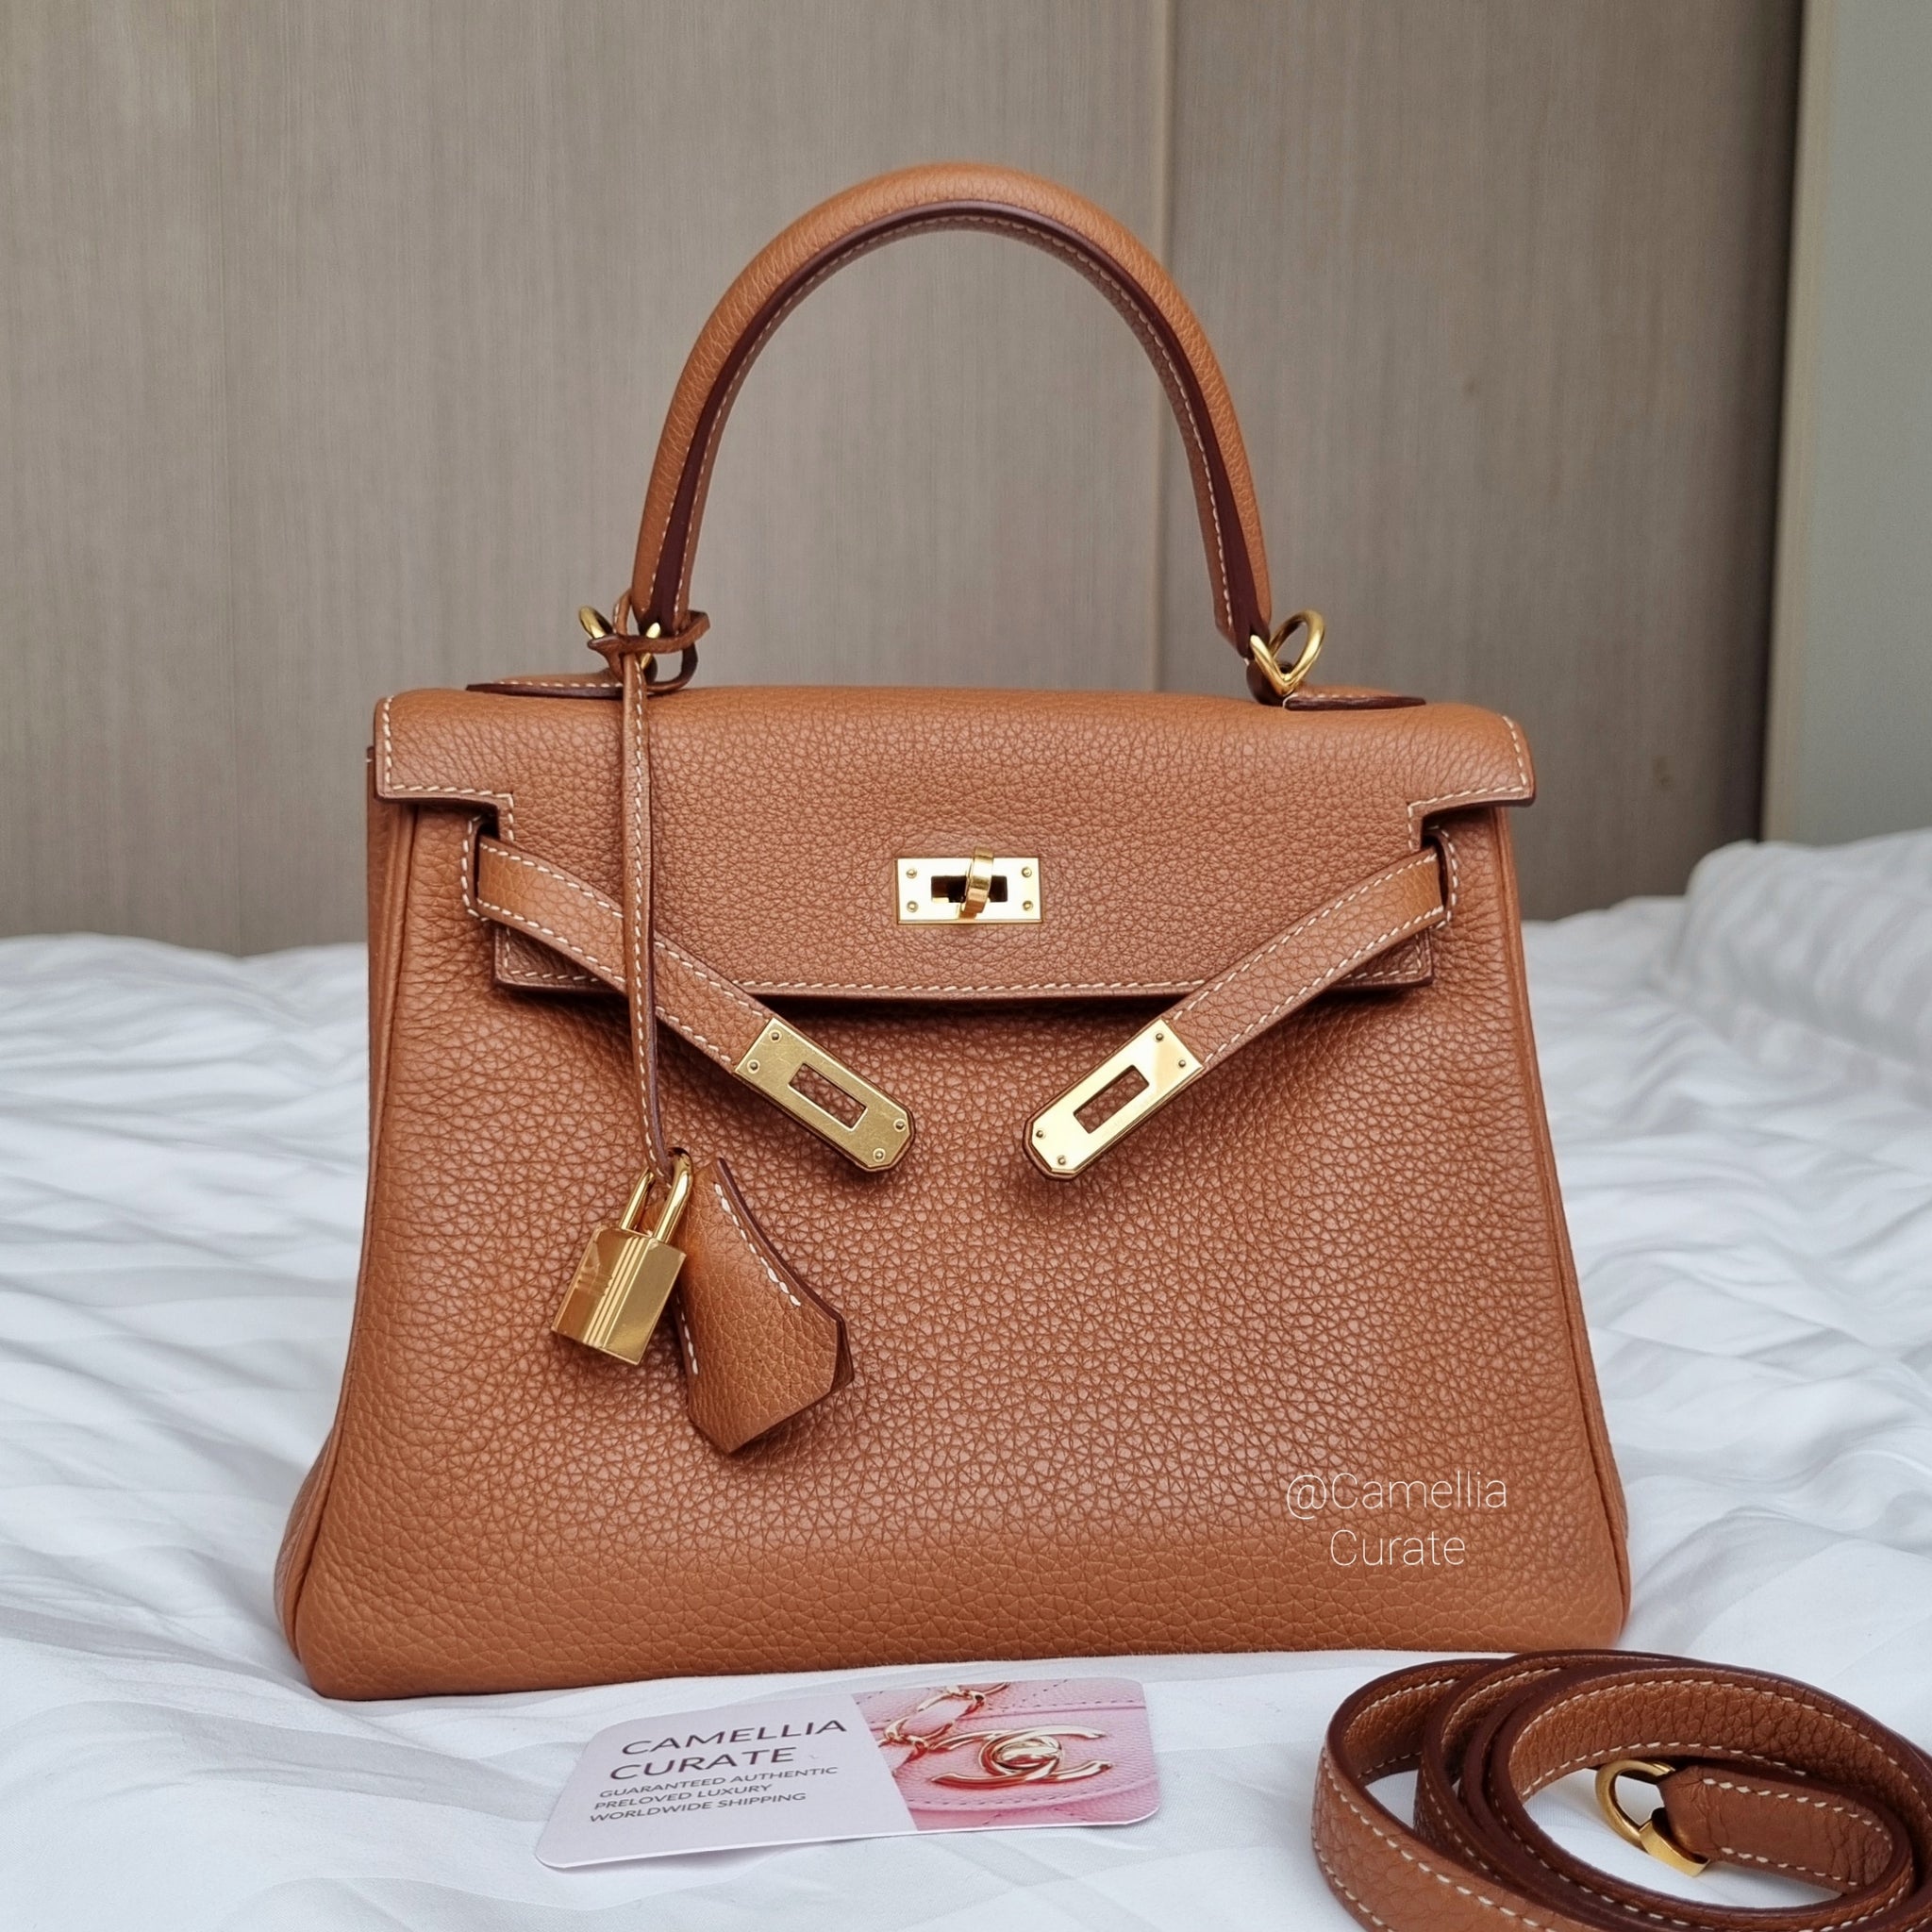 Hermes Kelly 25 in Brown Togo Leather and Gold Hardware, Luxury